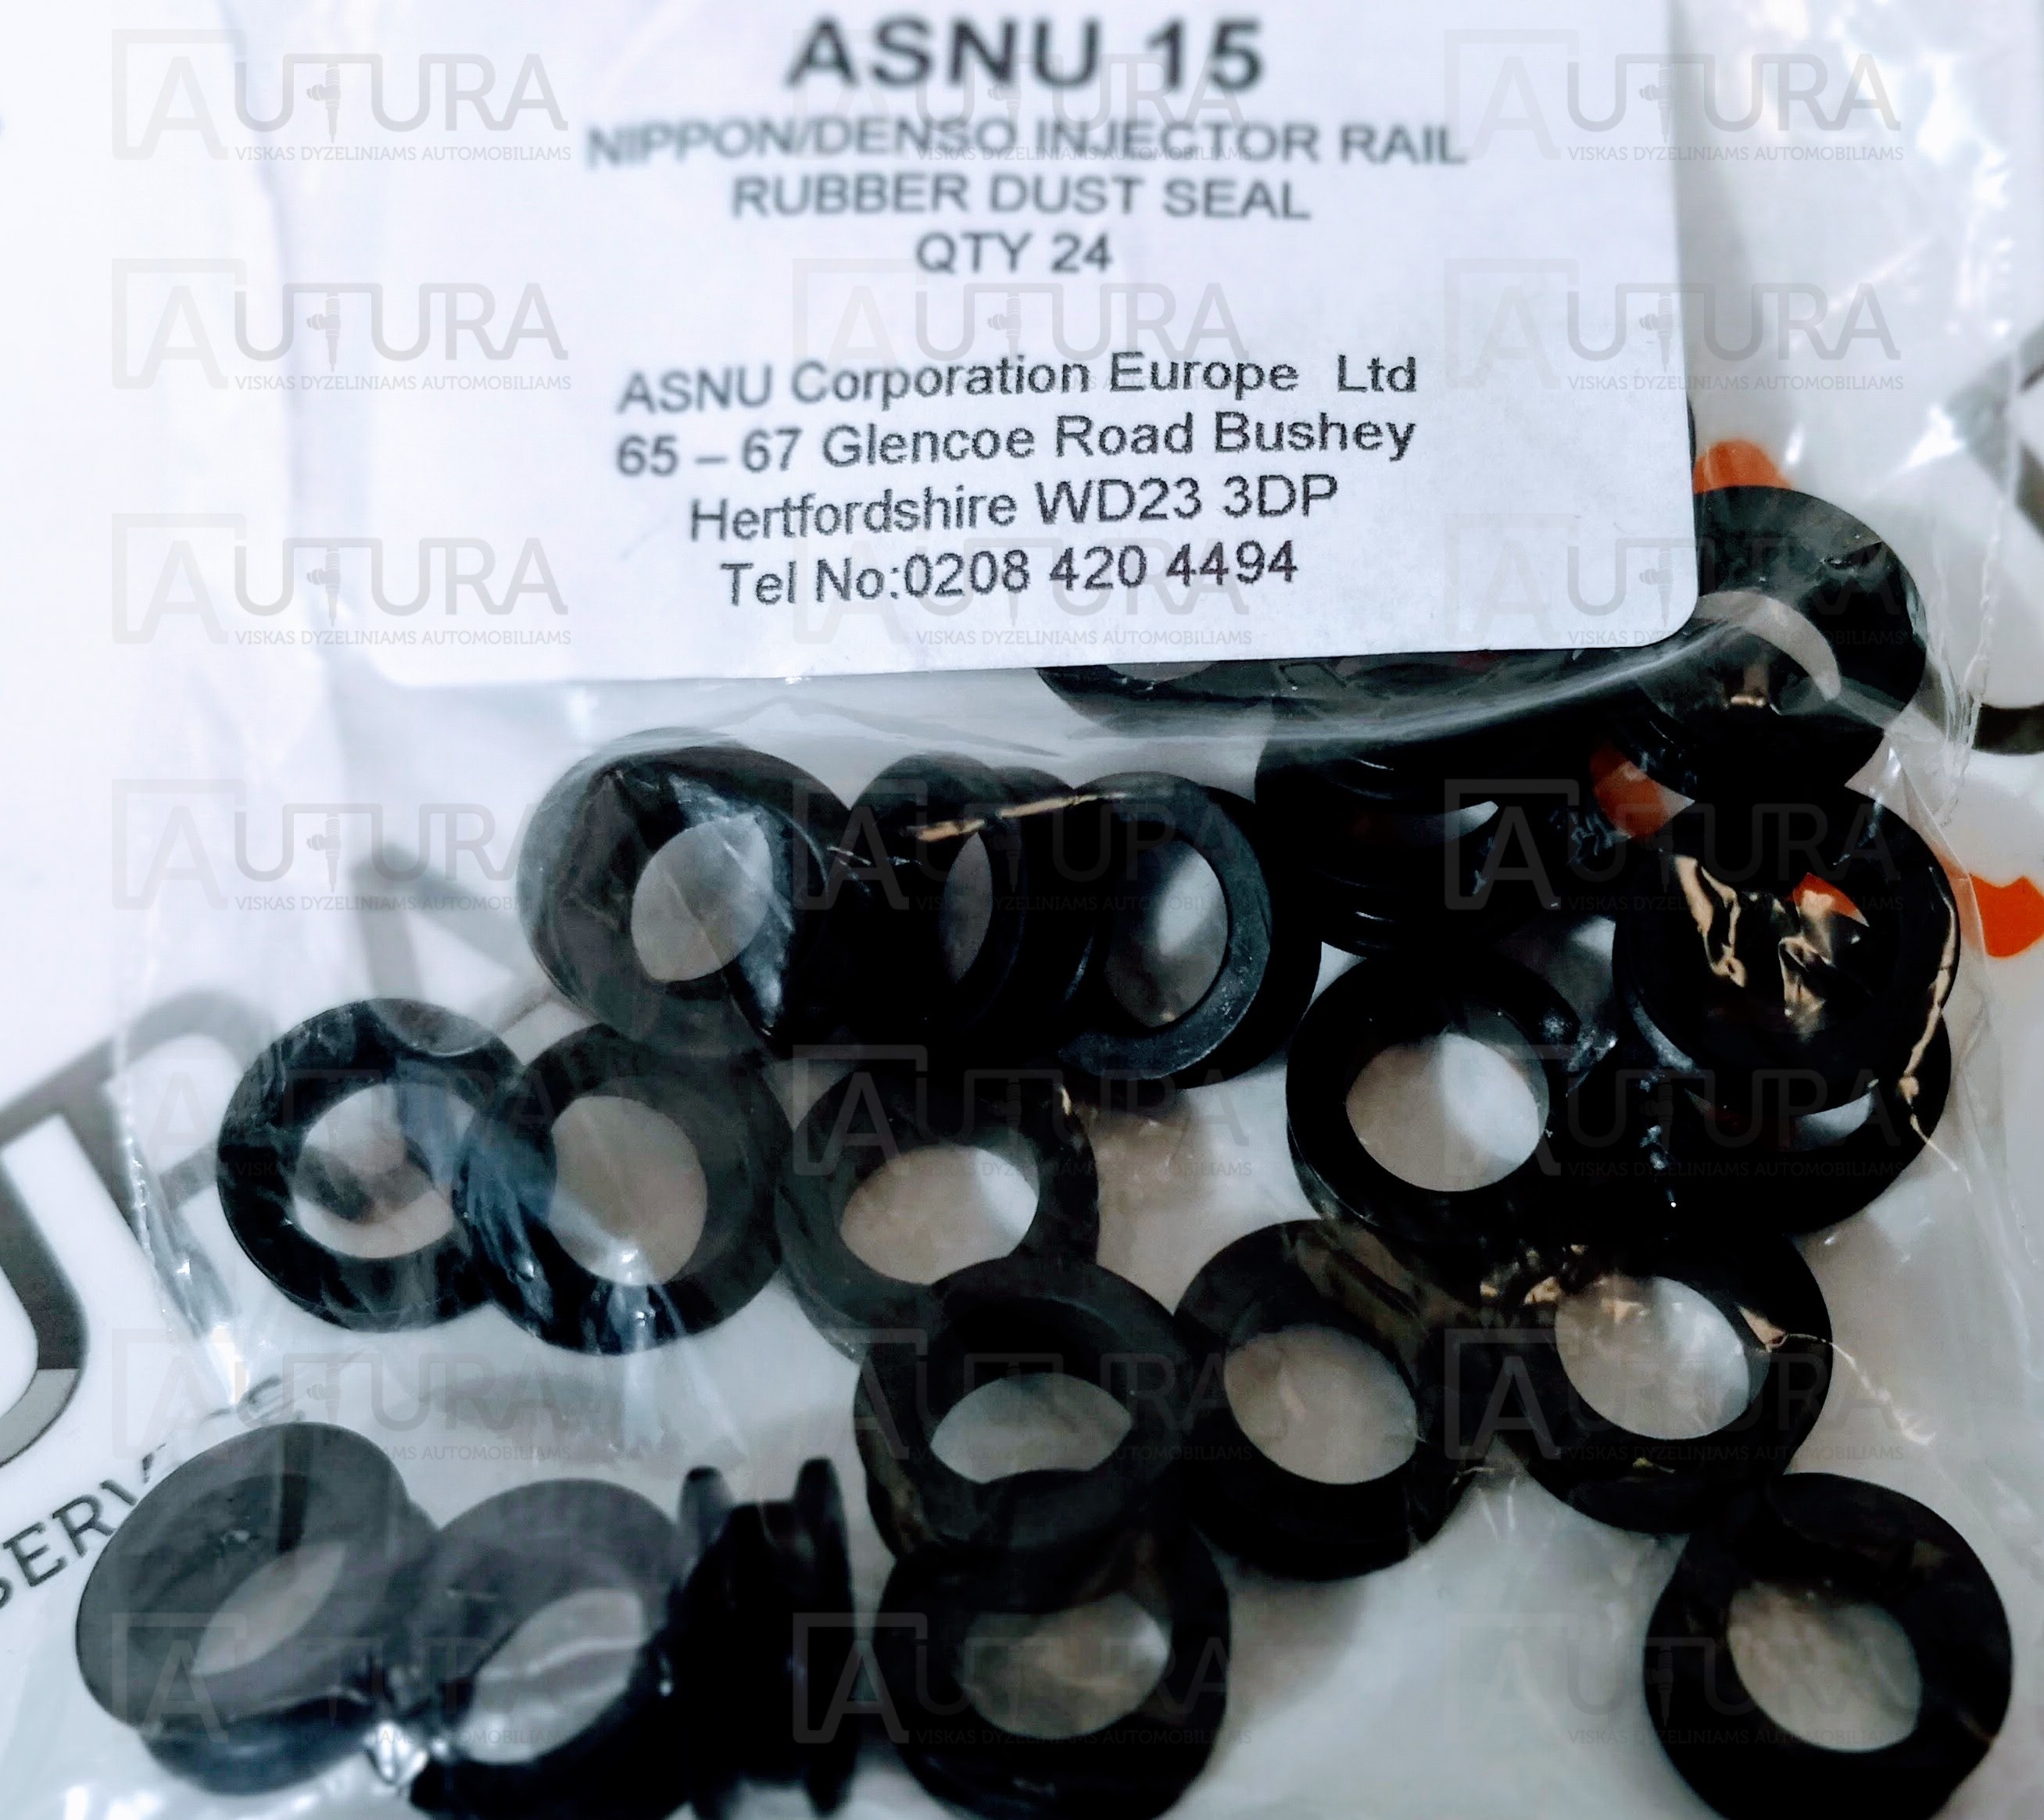 RUBBER DUST SEAL NIPPON DENSO INJECTOR-RAIL